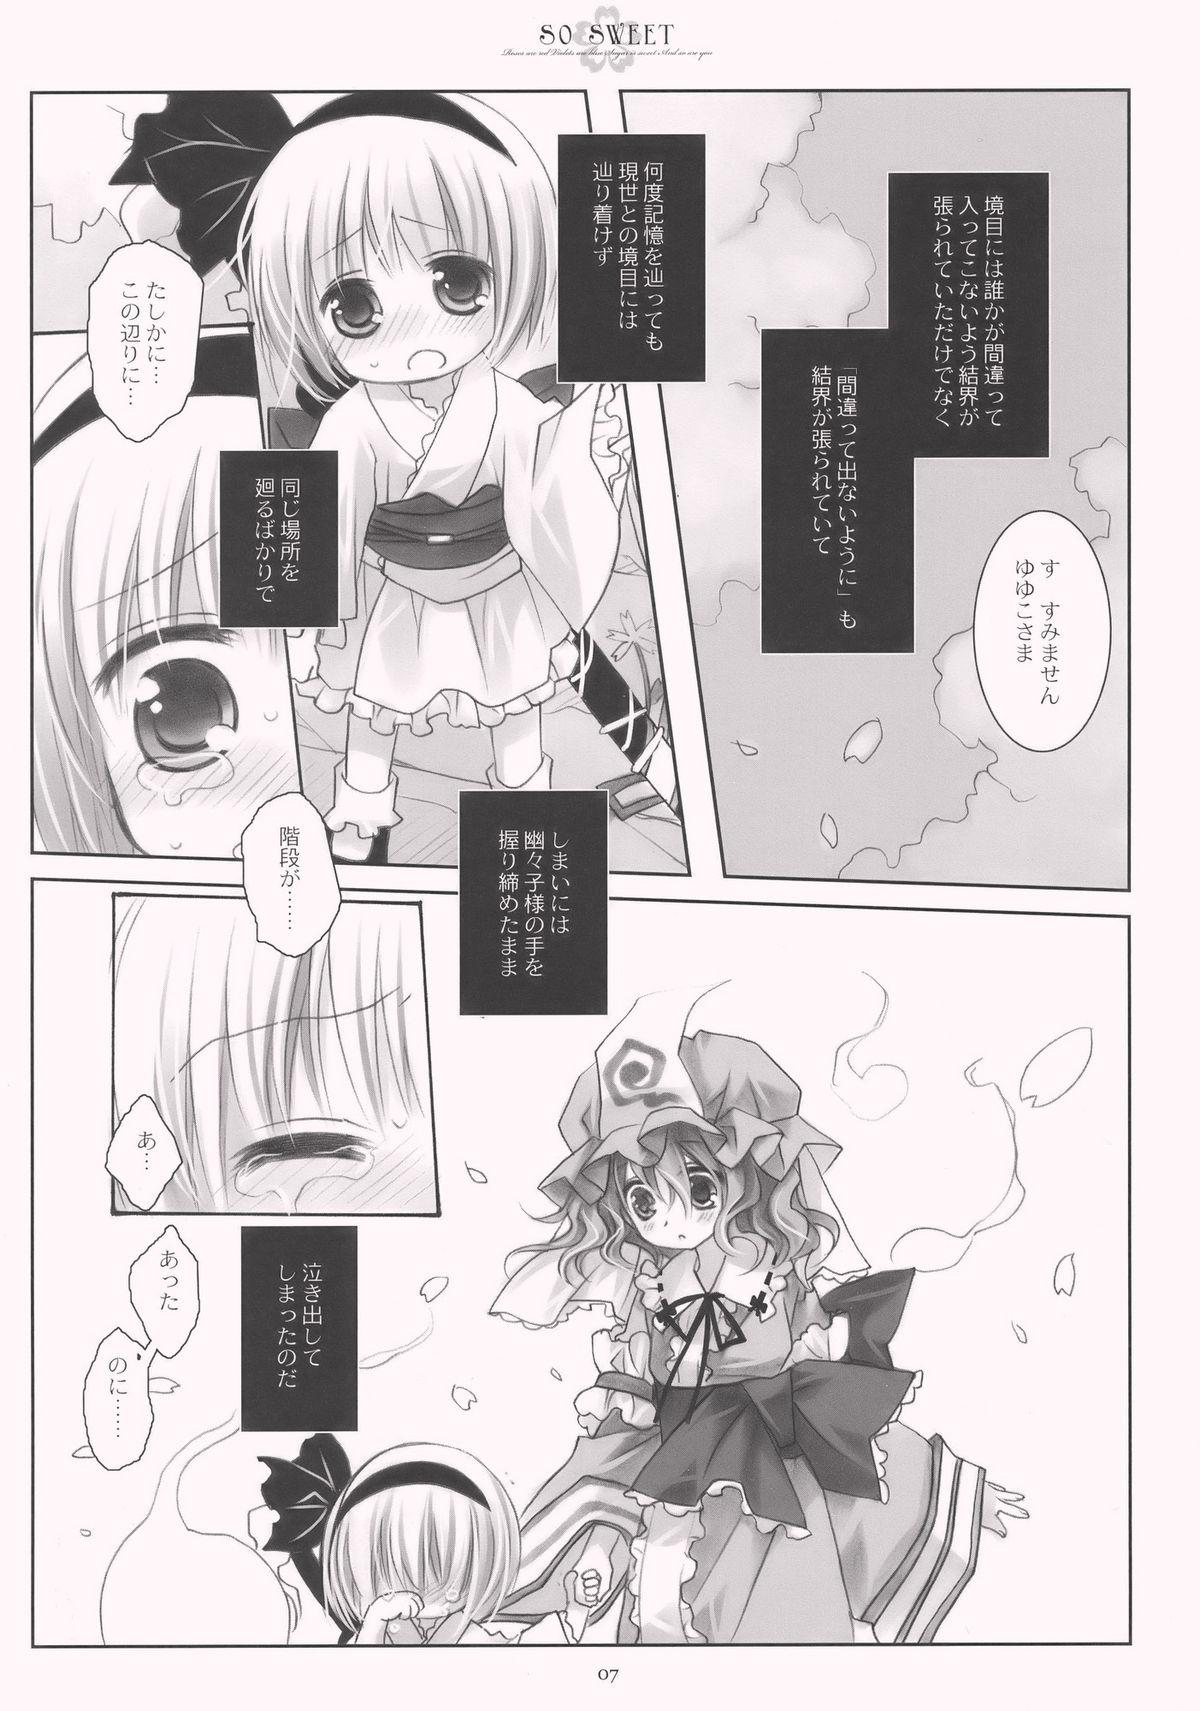 Screaming SO SWEET - Touhou project Anal Porn - Page 7